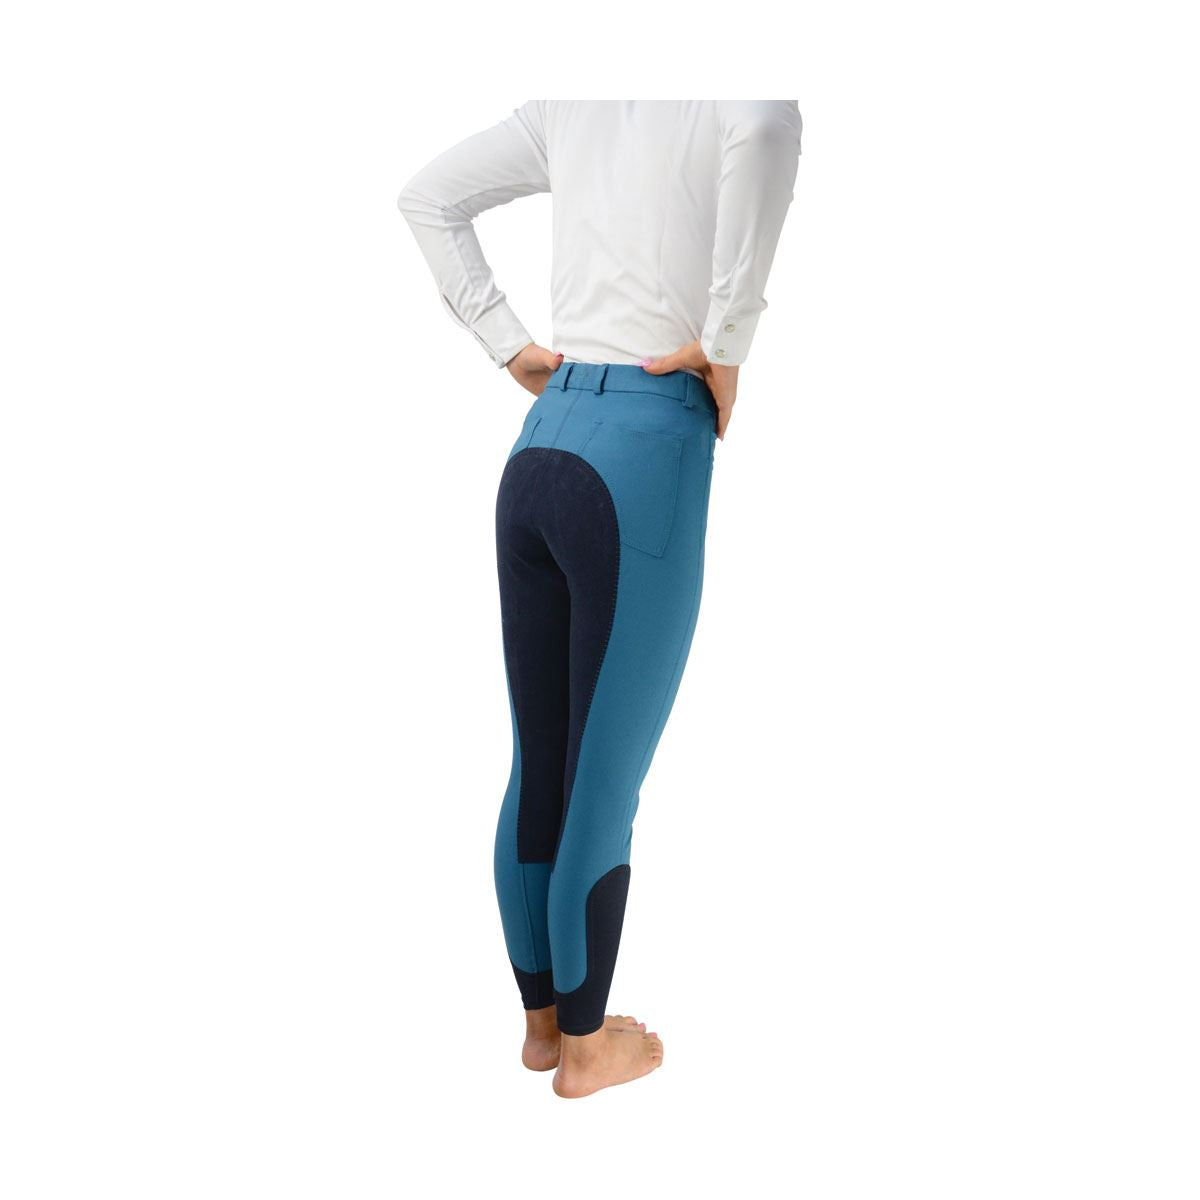 HyPERFORMANCE HyEDITION Full Seat Breeches - Just Horse Riders